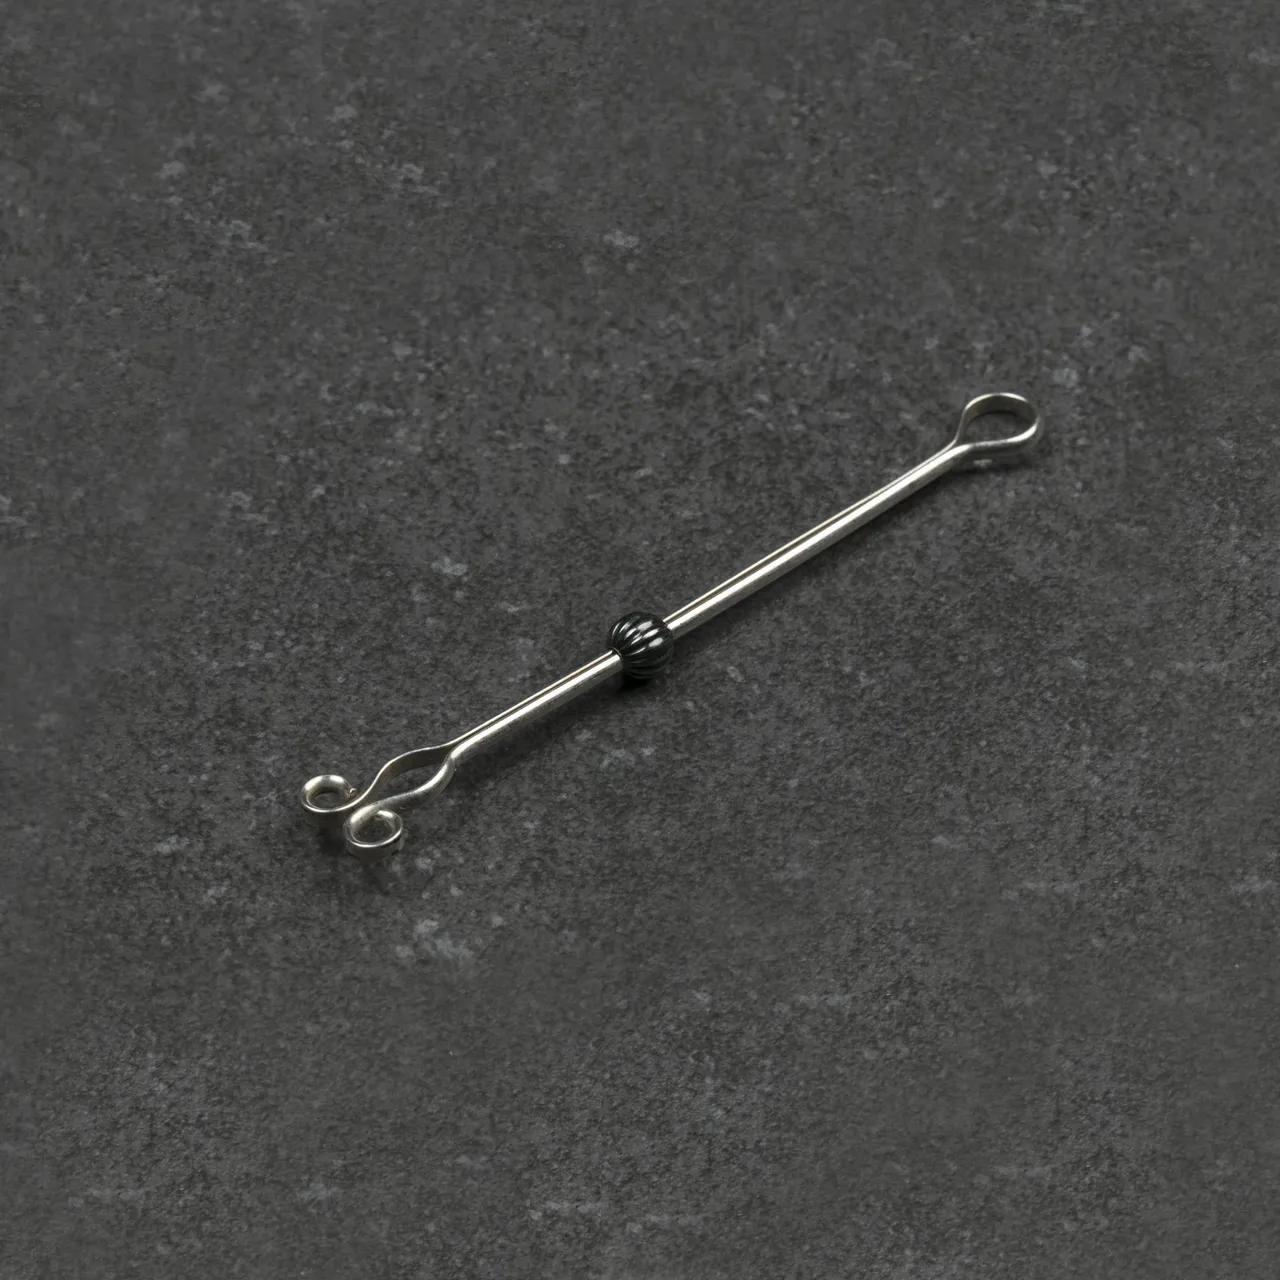 The Epicure - Artisanal Handmade Silver Roach Clip photo 1